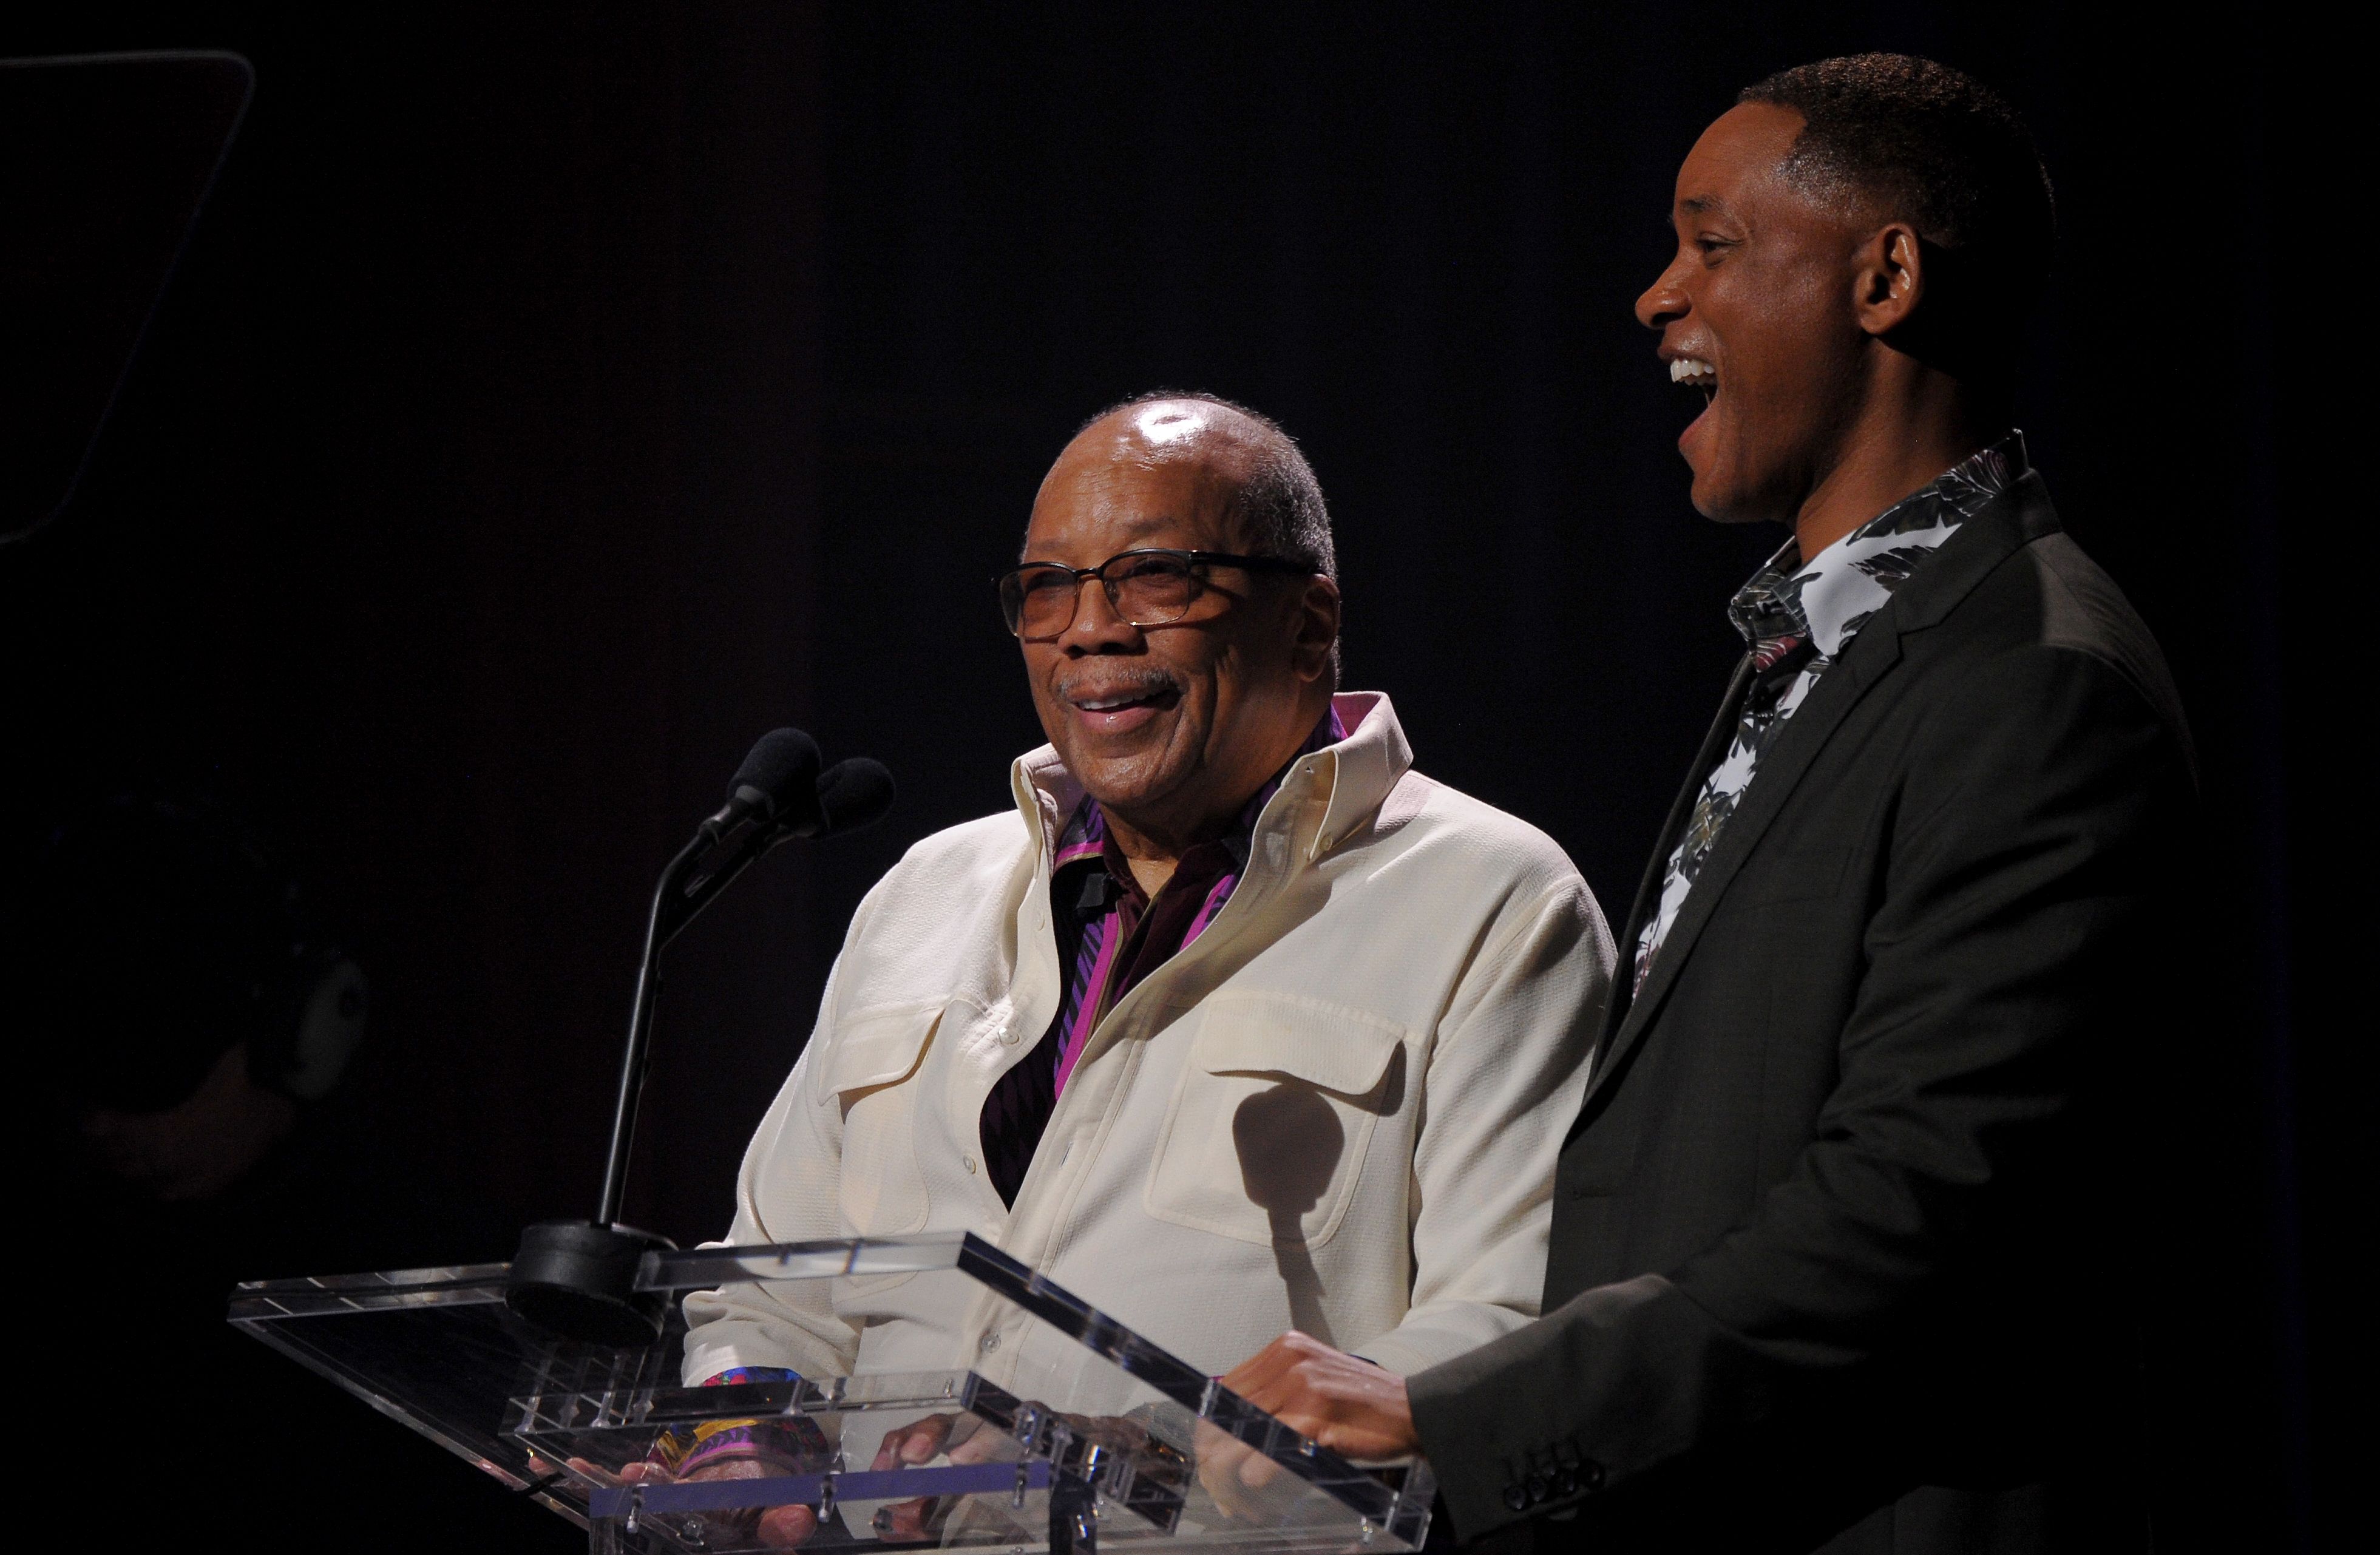 Quincy Jones and Will Smith now